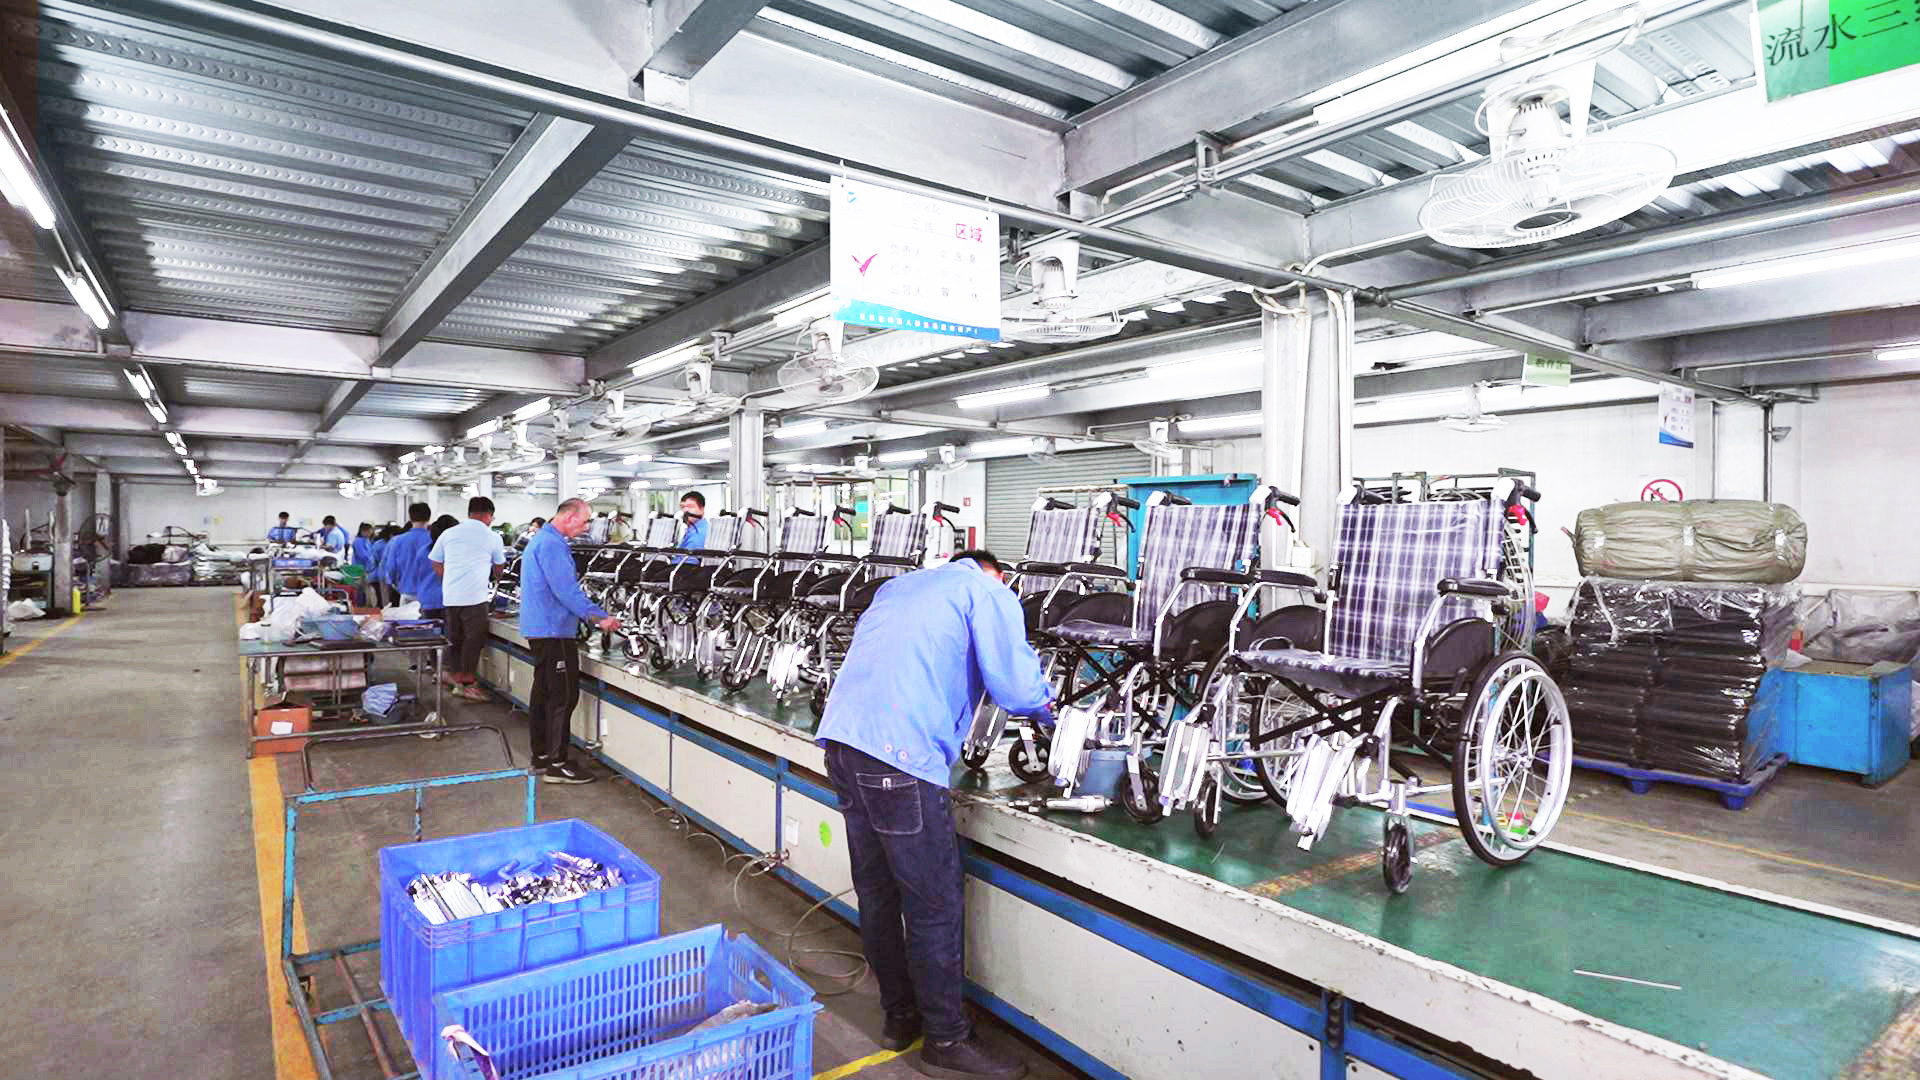 DAYANG is strongly positioned as one of the world's best-known and most successful manufacturers of wheelchairs and supplier of rehabilitation aids.